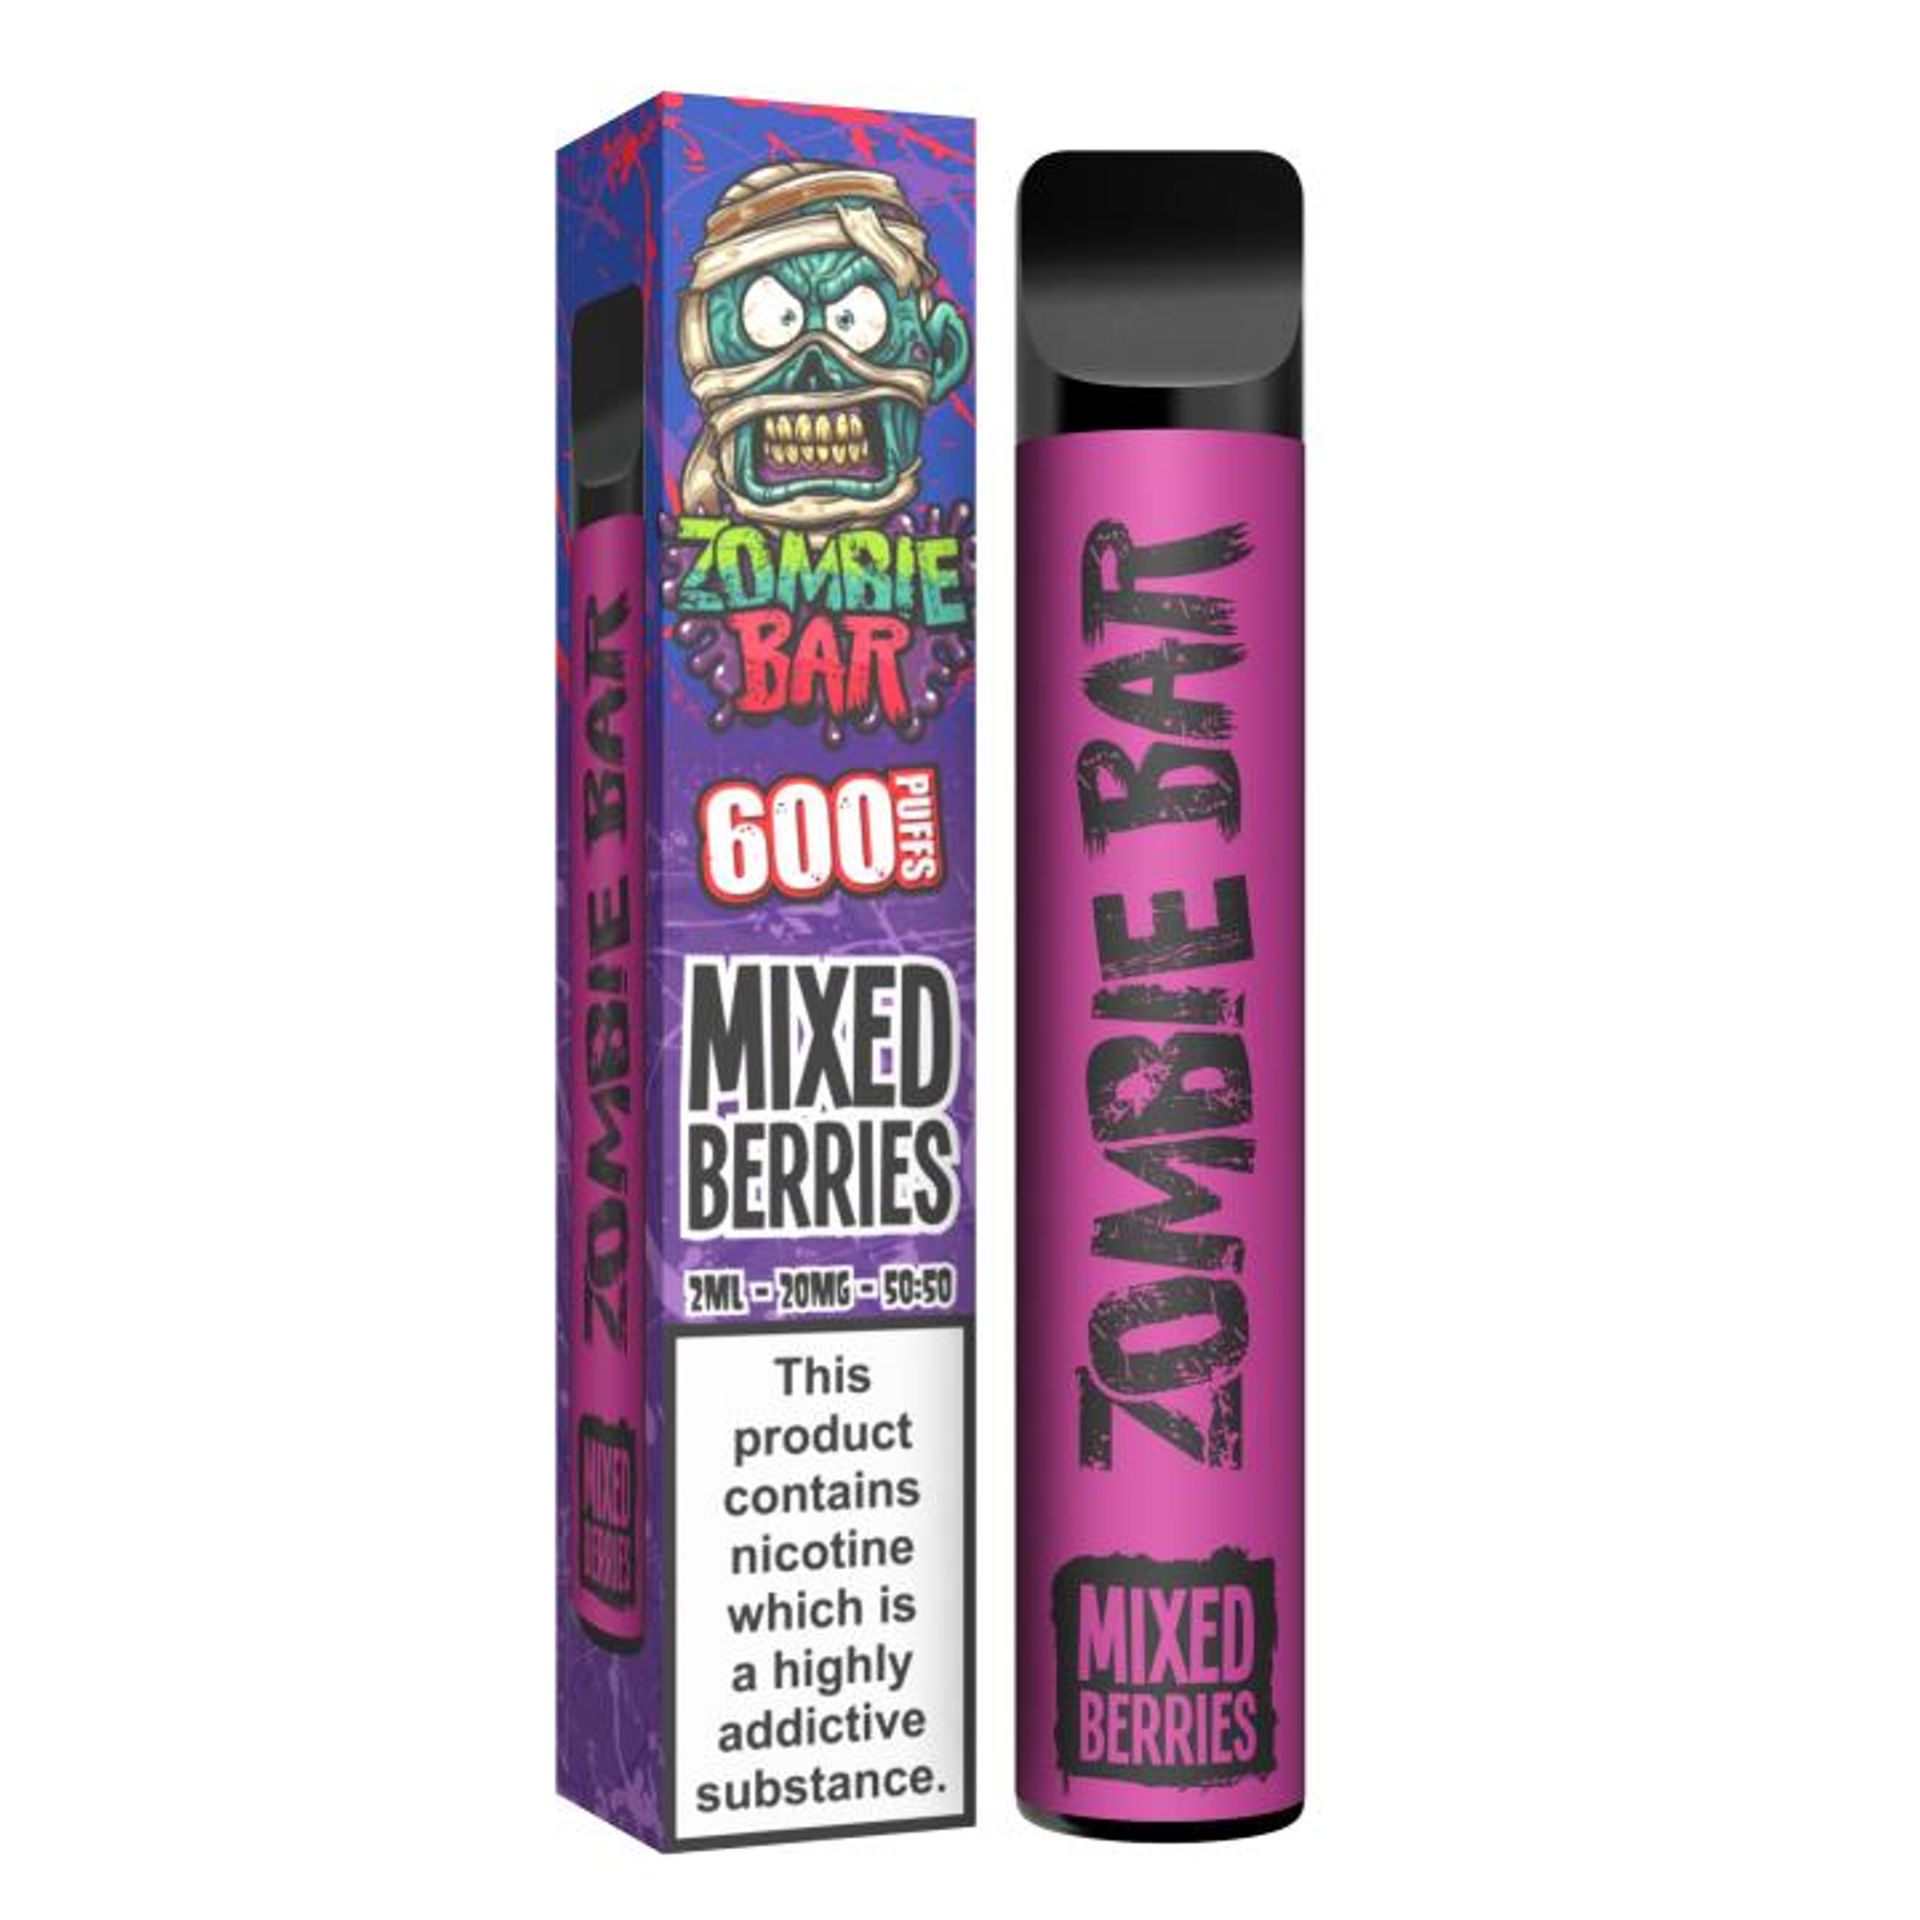 Image of Mixed Berries by Zombie Bar